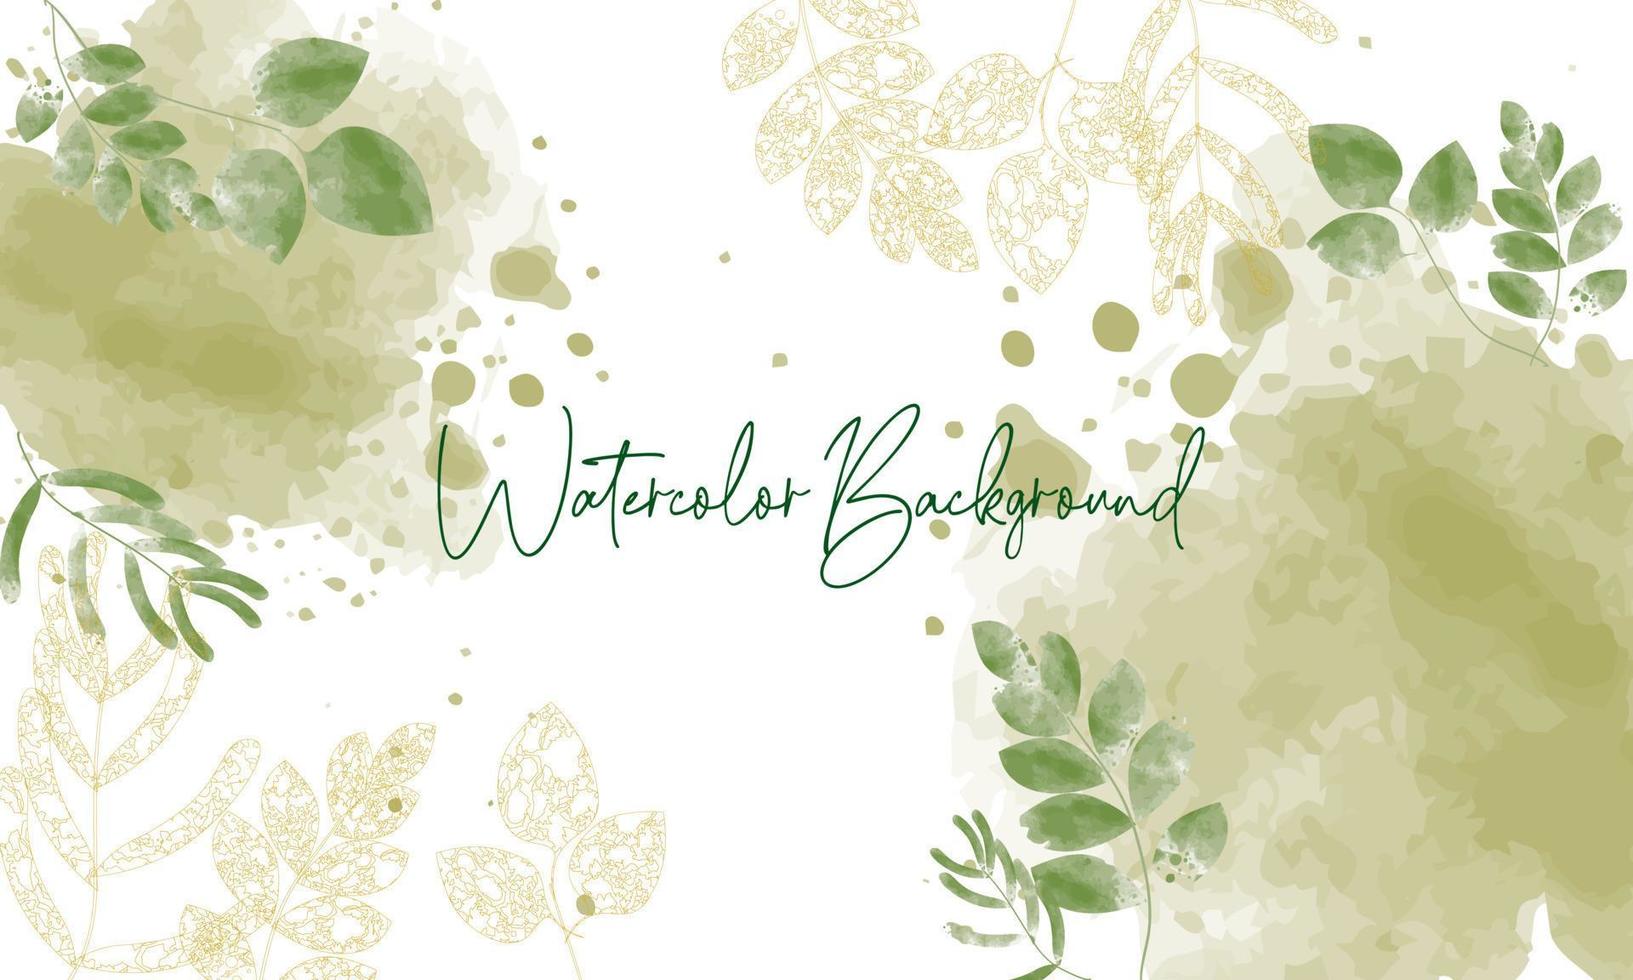 watercolor green leaves on splash background wedding or birthday invitation card template. Watercolor background with green leaves. Vector illustration